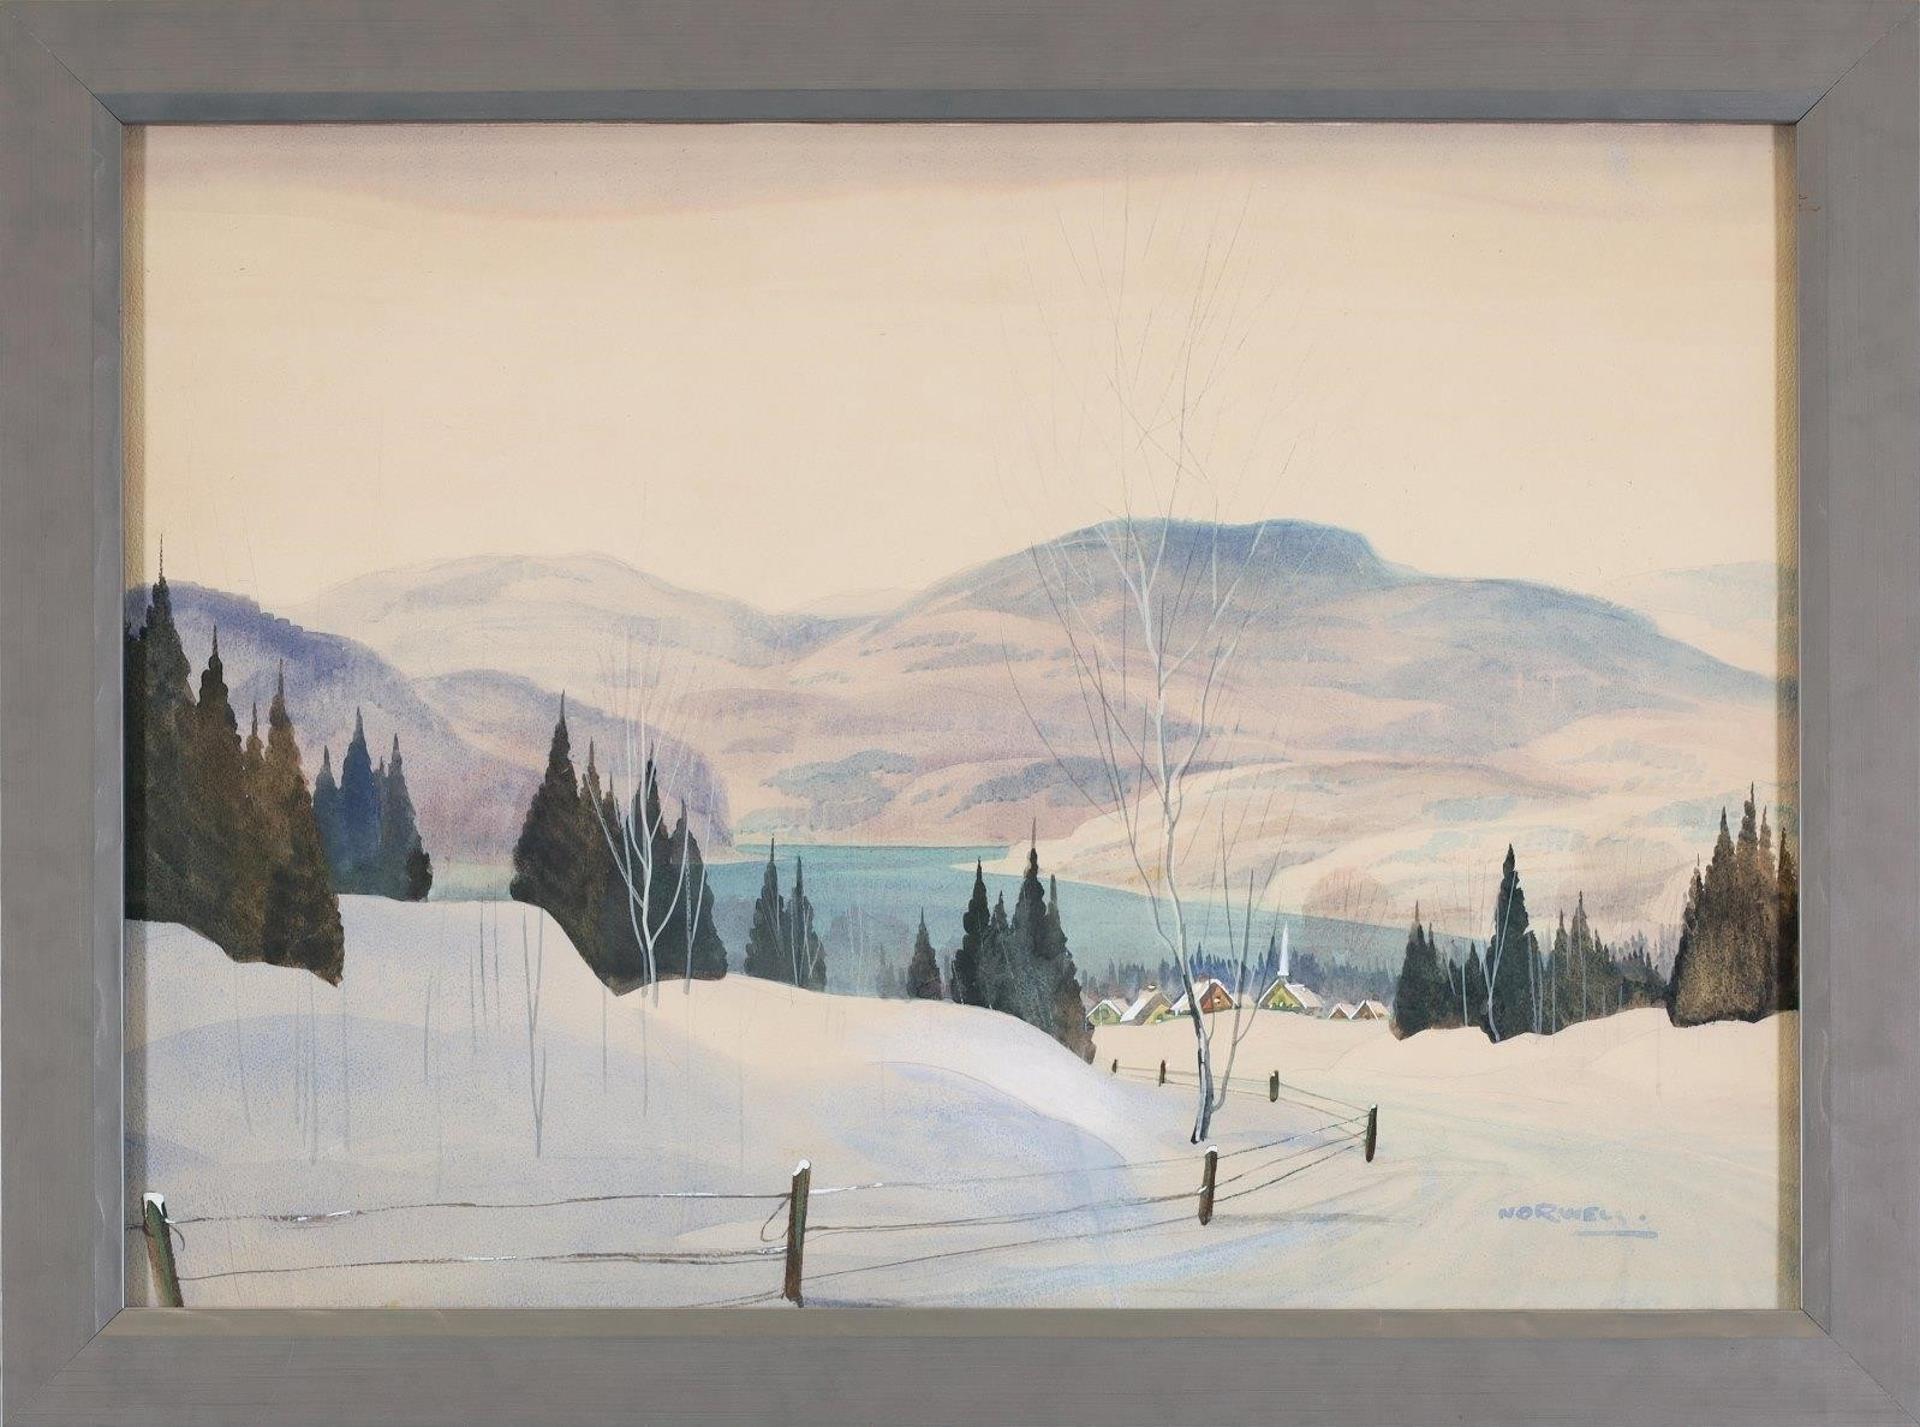 Graham Norble Norwell (1901-1967) - Untitled, View of a Laurentian Village